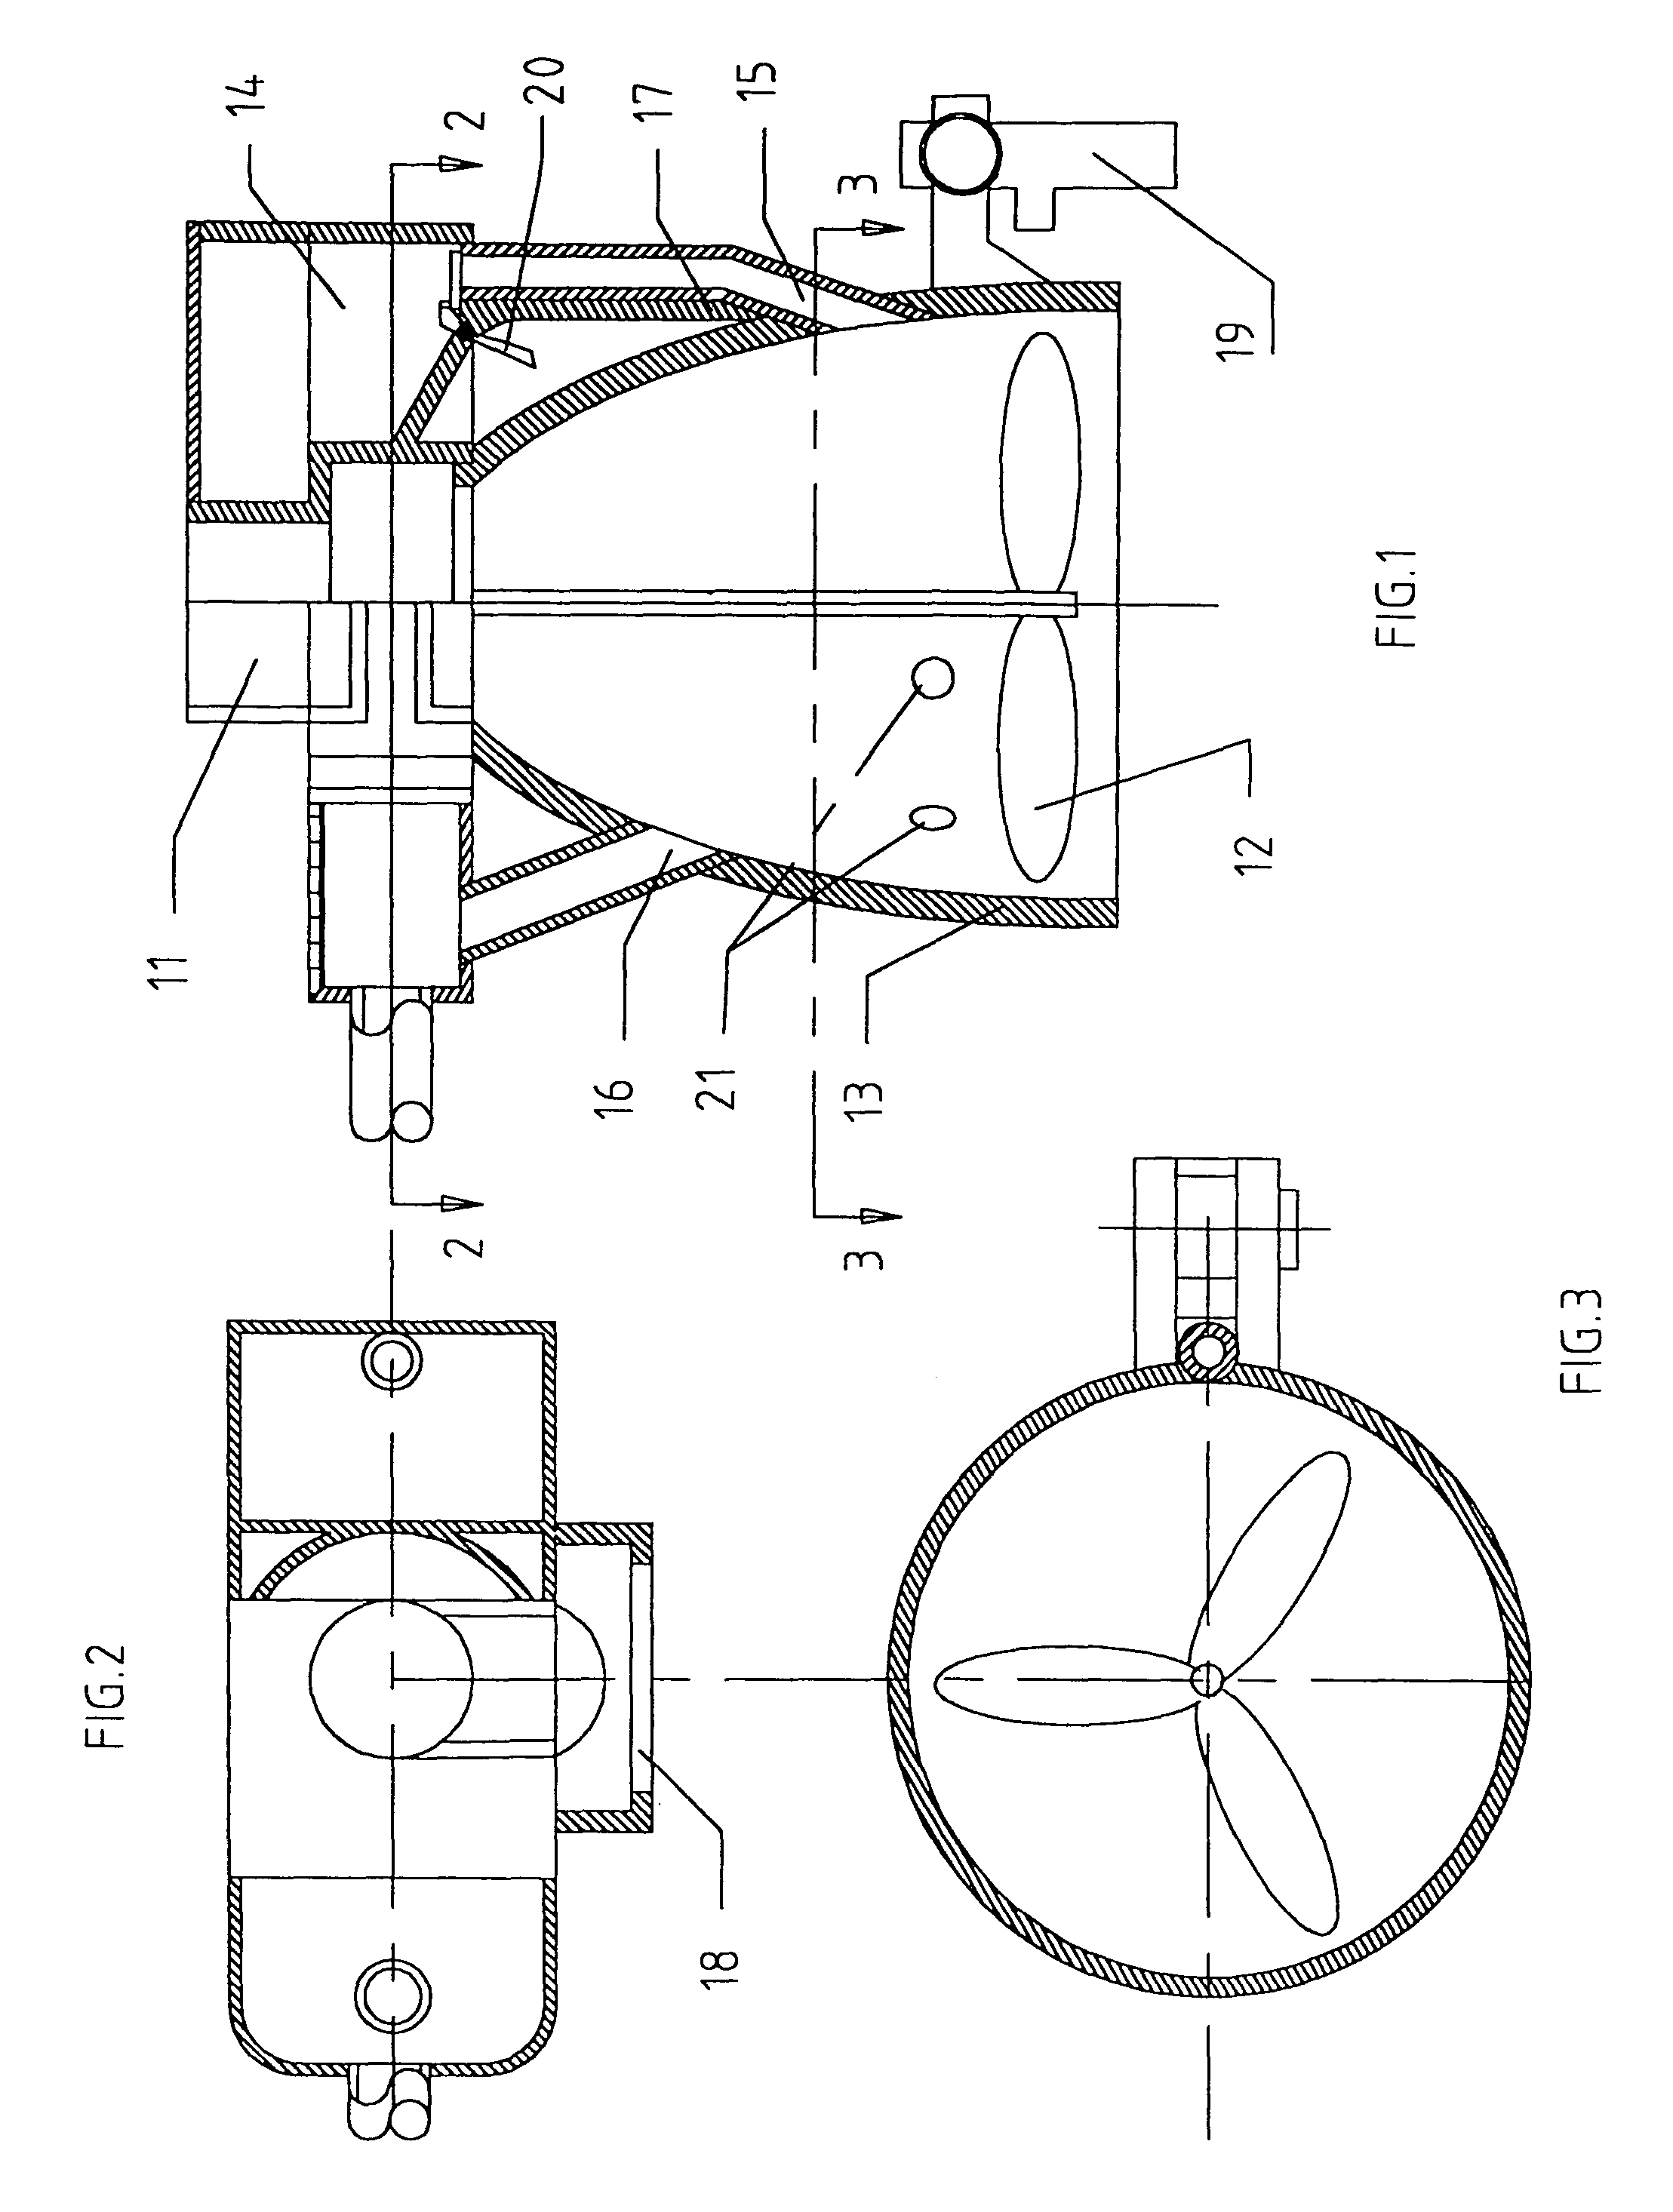 Apparatus and method for recycling of dross in a soldering apparatus